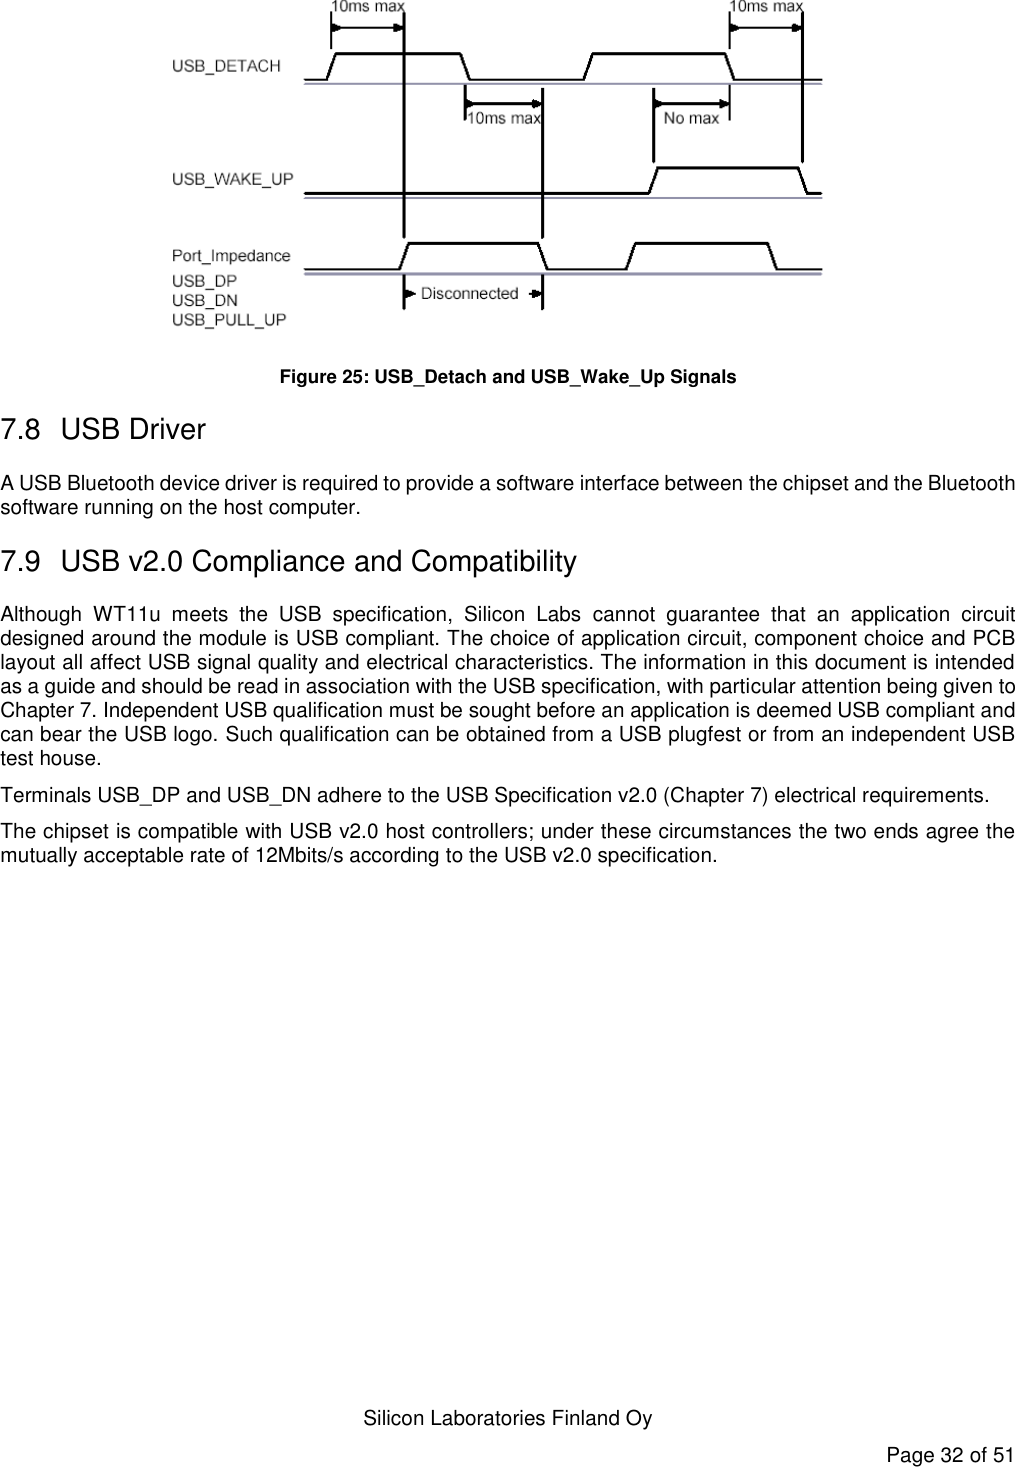   Silicon Laboratories Finland Oy Page 32 of 51  Figure 25: USB_Detach and USB_Wake_Up Signals 7.8  USB Driver A USB Bluetooth device driver is required to provide a software interface between the chipset and the Bluetooth software running on the host computer. 7.9  USB v2.0 Compliance and Compatibility Although  WT11u  meets  the  USB  specification,  Silicon  Labs  cannot  guarantee  that  an  application  circuit designed around the module is USB compliant. The choice of application circuit, component choice and PCB layout all affect USB signal quality and electrical characteristics. The information in this document is intended as a guide and should be read in association with the USB specification, with particular attention being given to Chapter 7. Independent USB qualification must be sought before an application is deemed USB compliant and can bear the USB logo. Such qualification can be obtained from a USB plugfest or from an independent USB test house. Terminals USB_DP and USB_DN adhere to the USB Specification v2.0 (Chapter 7) electrical requirements. The chipset is compatible with USB v2.0 host controllers; under these circumstances the two ends agree the mutually acceptable rate of 12Mbits/s according to the USB v2.0 specification.  